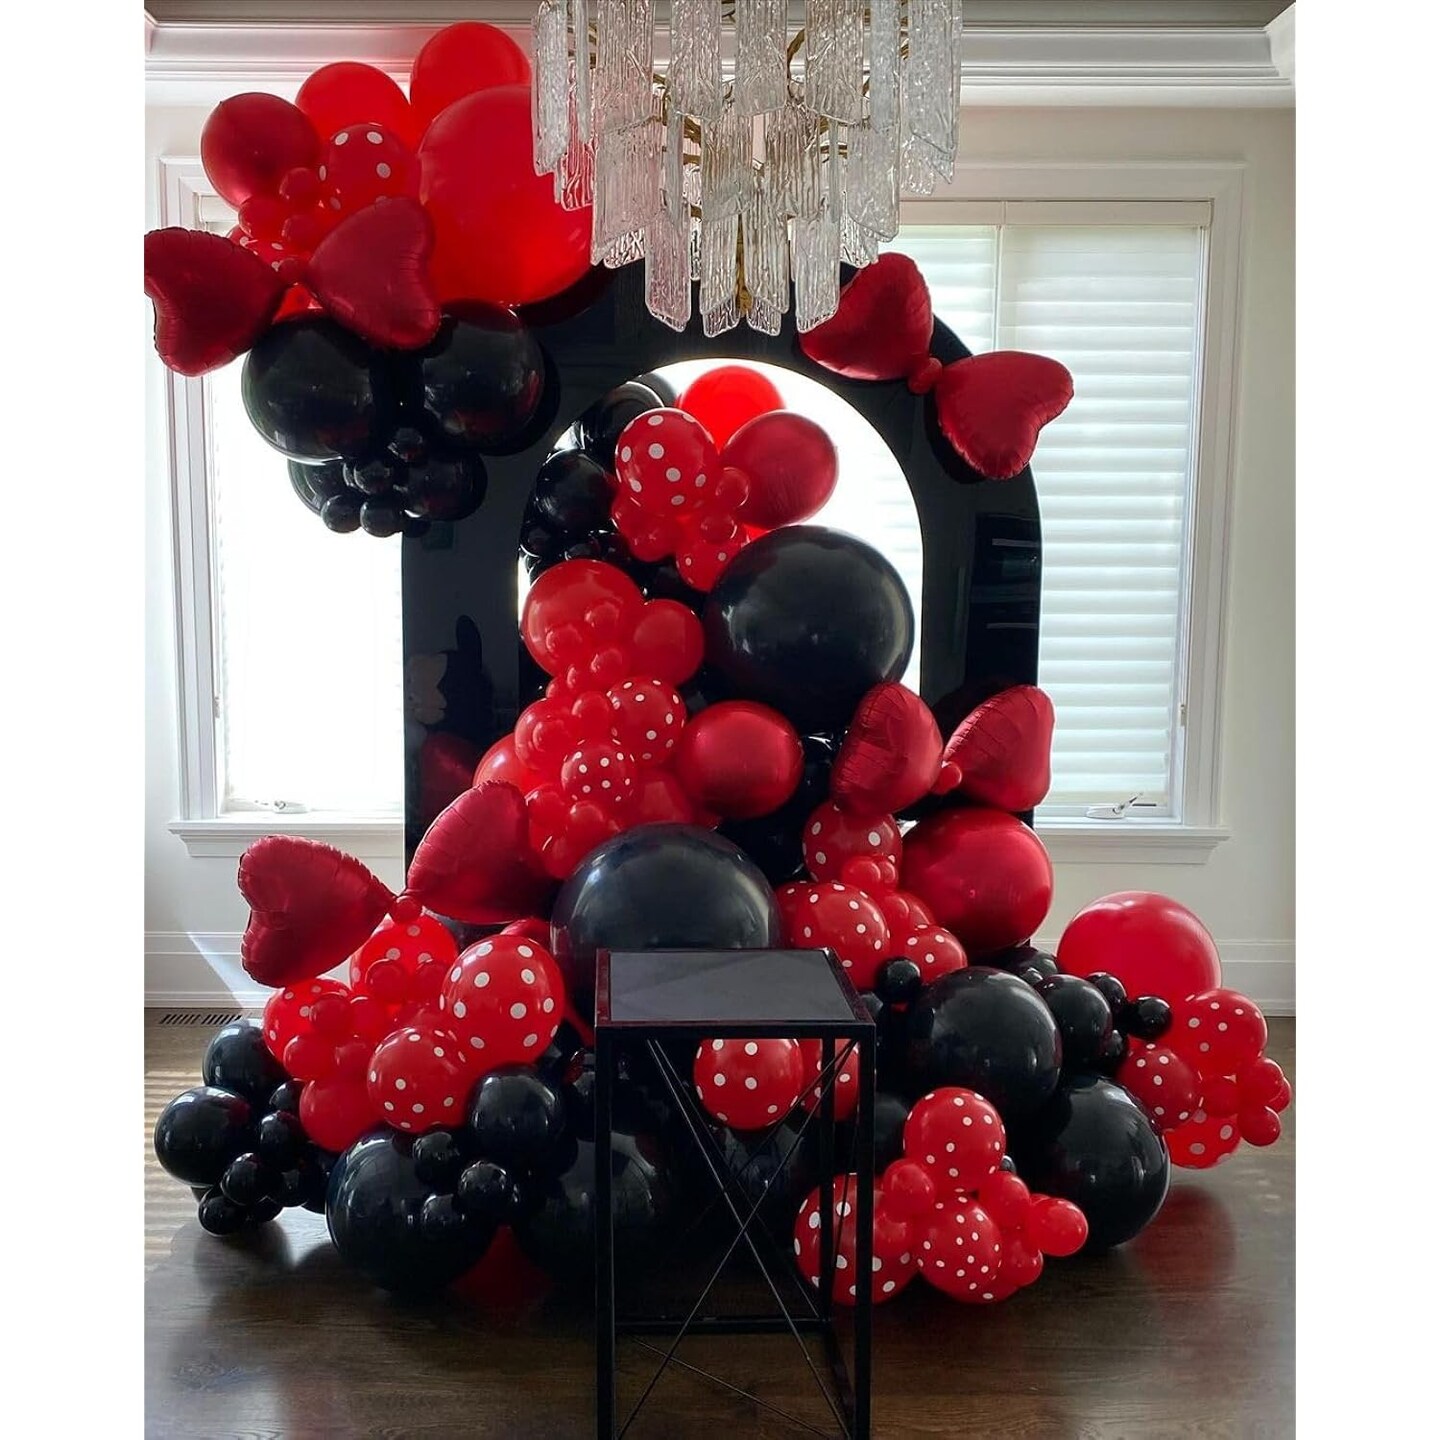 Red and Black Balloon Arch Kit, 140Pcs Different Sizes inch Black and Red Balloons and Confetti Party Balloon Garland Kit for Birthday, Wedding, Graduation, Anniversary, Prom Decorations